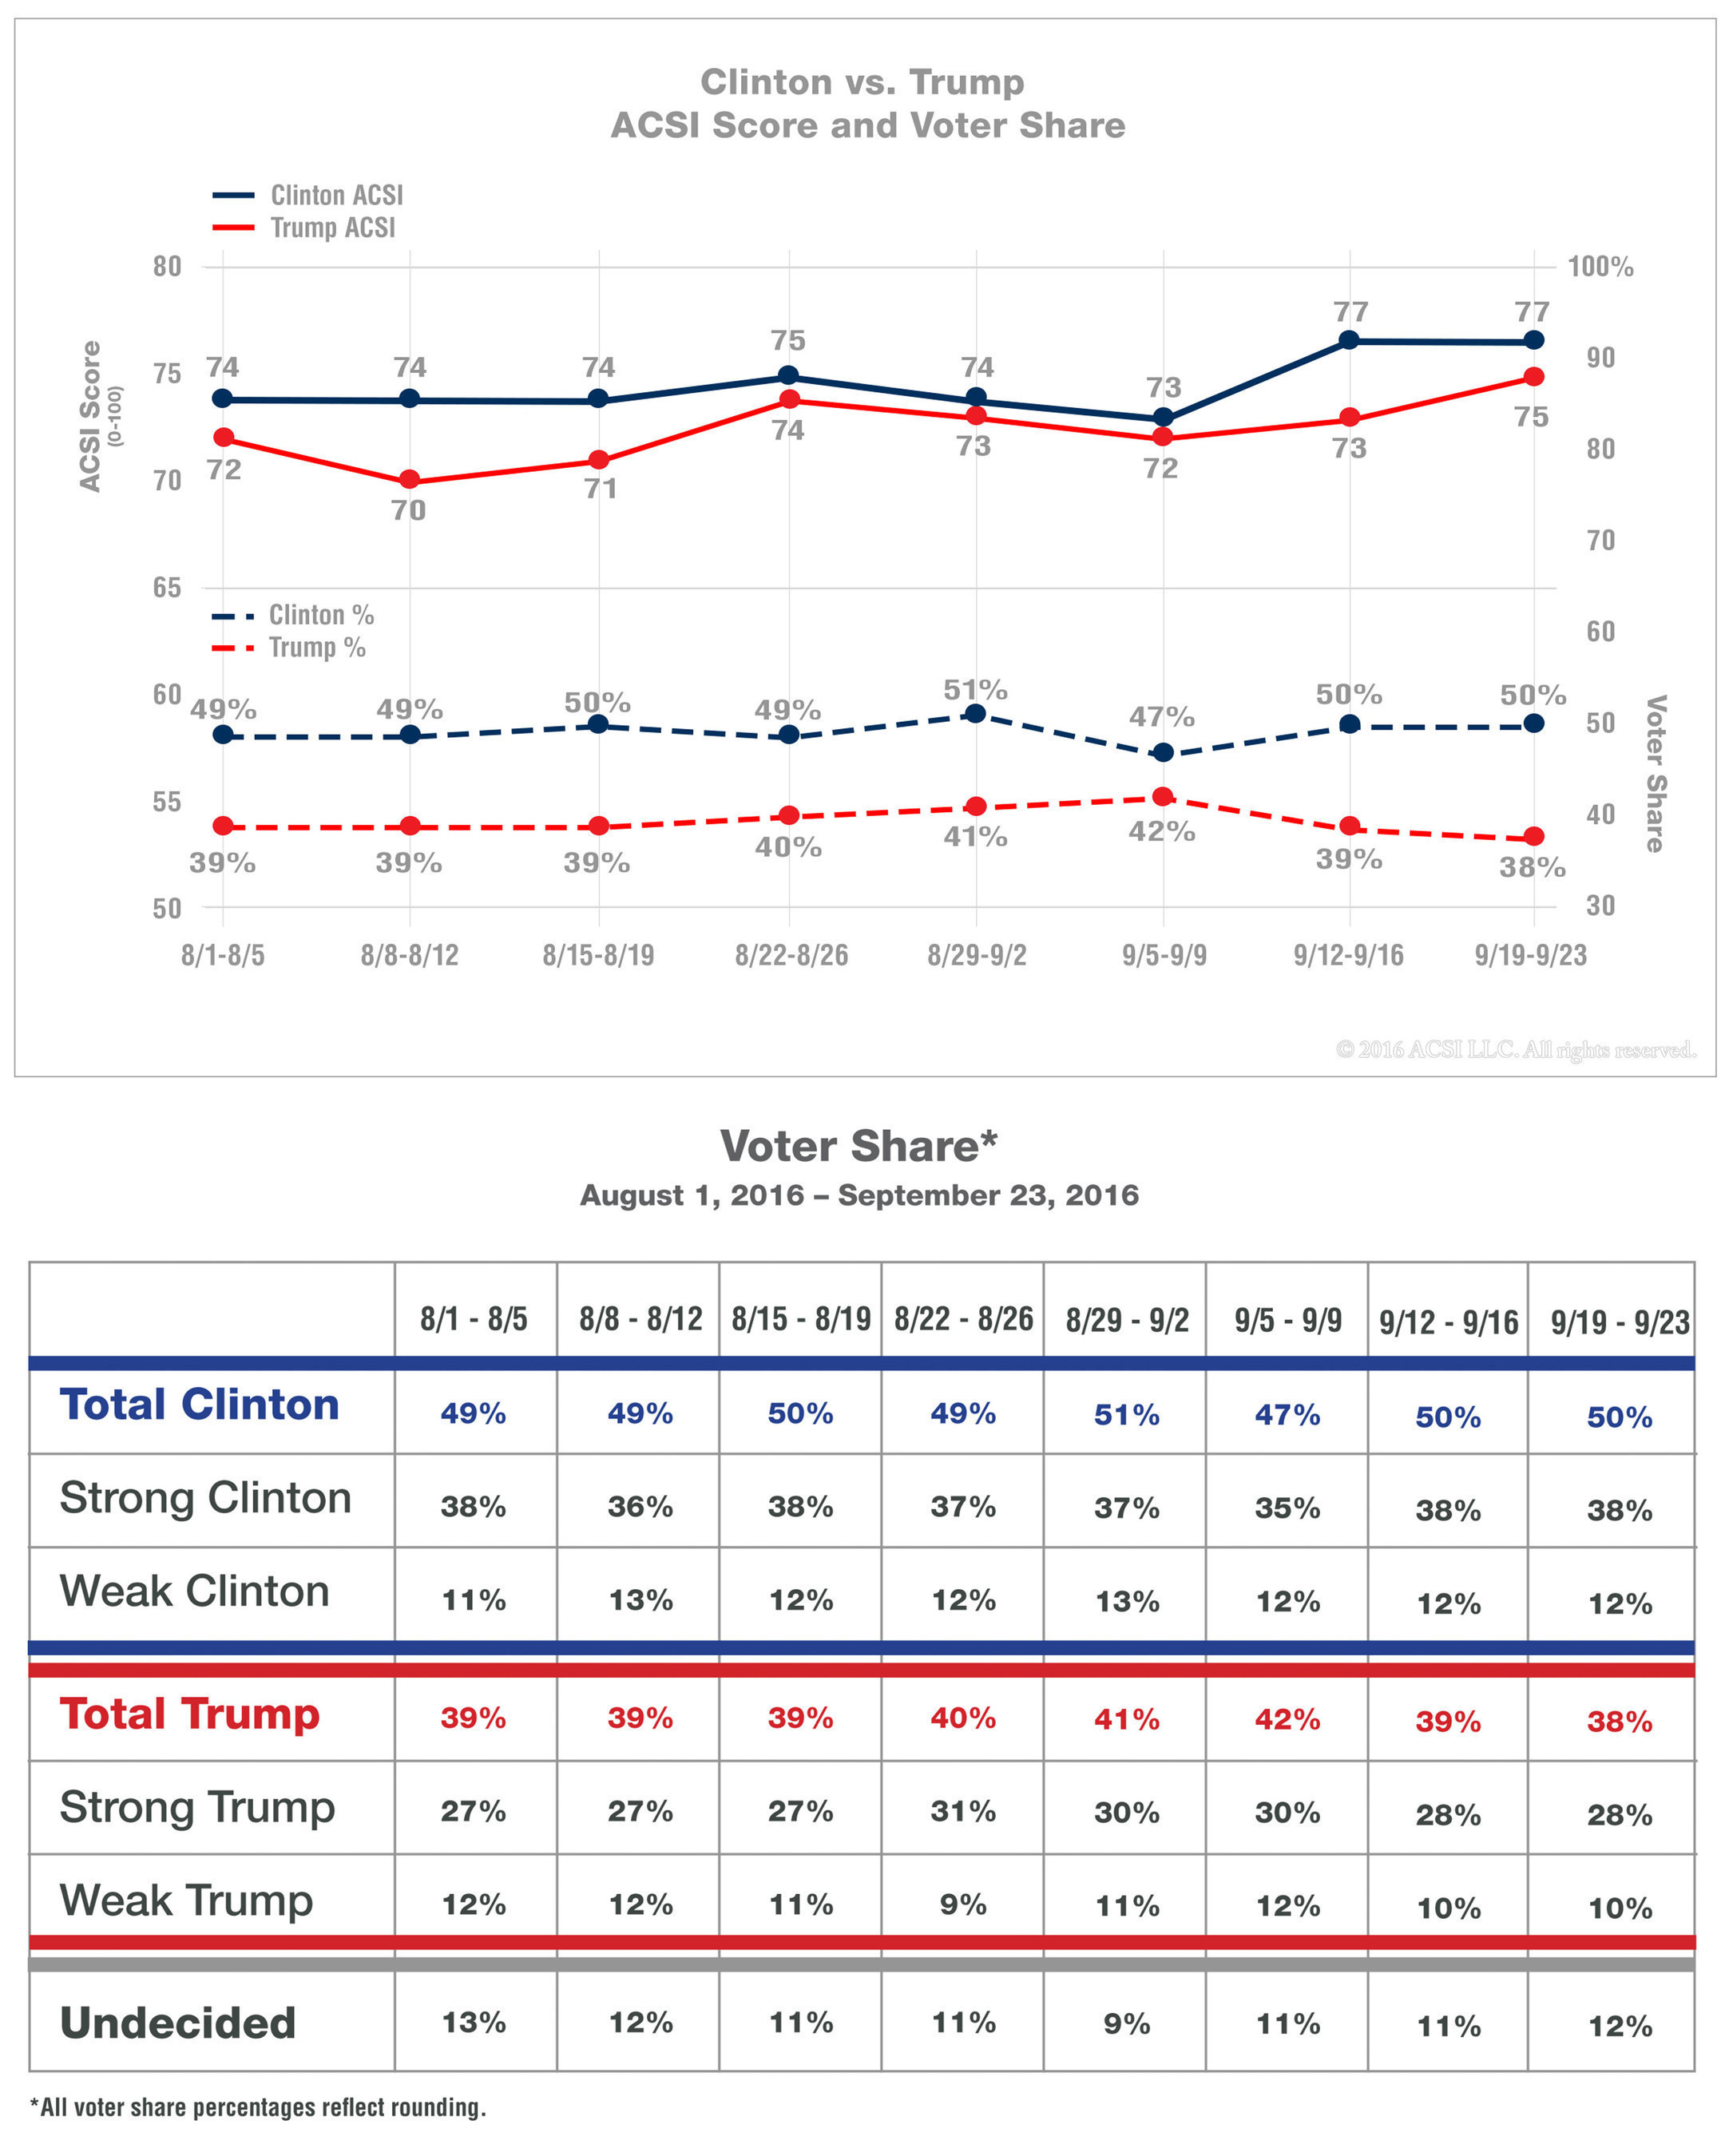 ACSI Presidential Election Survey Week of September 19-23 Clinton leads Trump in voter satisfaction and voter share; Trump lags Clinton in percentage of strong supporters